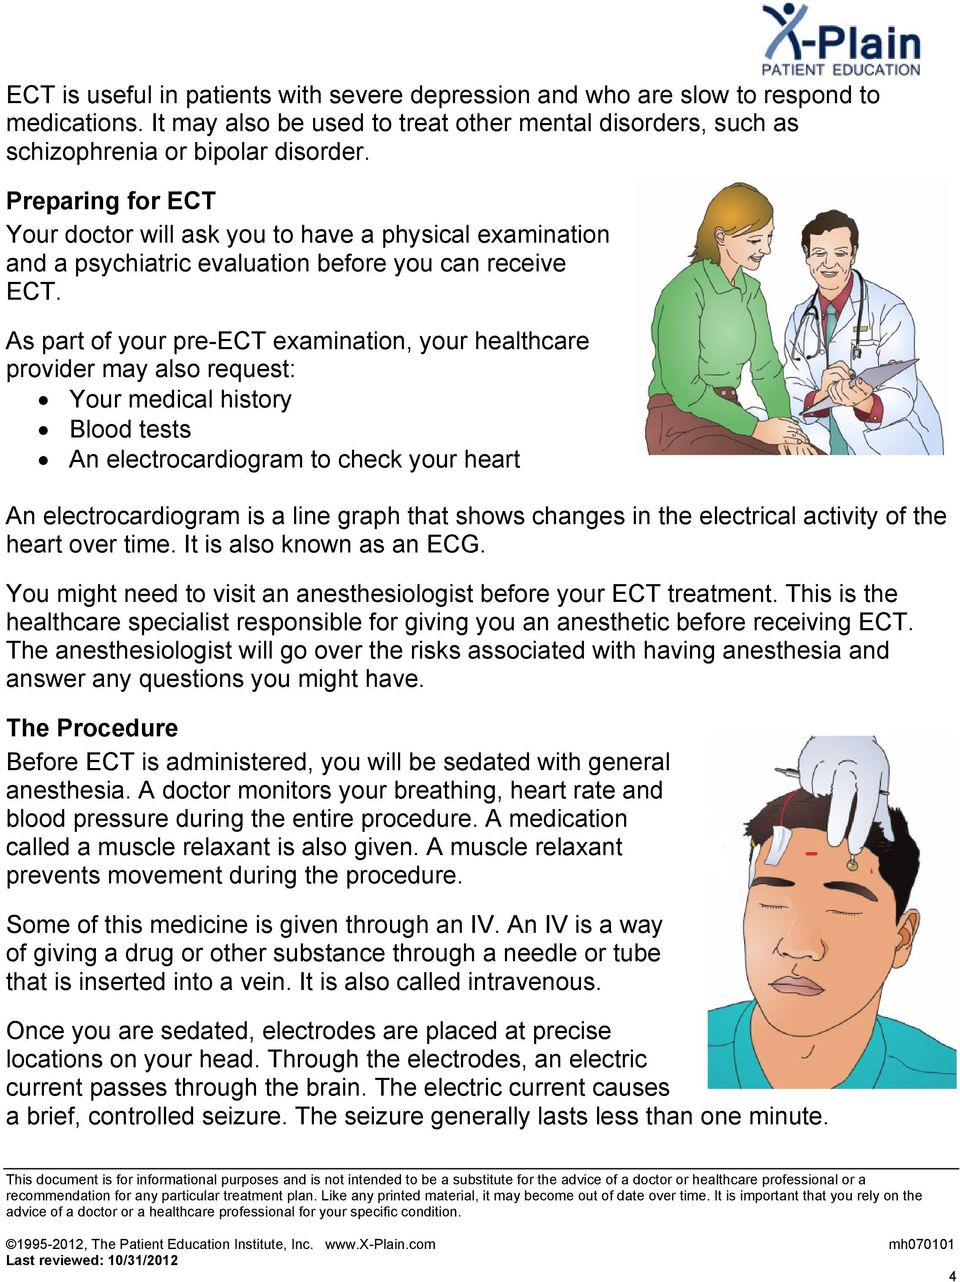 As part of your pre-ect examination, your healthcare provider may also request: Your medical history Blood tests An electrocardiogram to check your heart An electrocardiogram is a line graph that